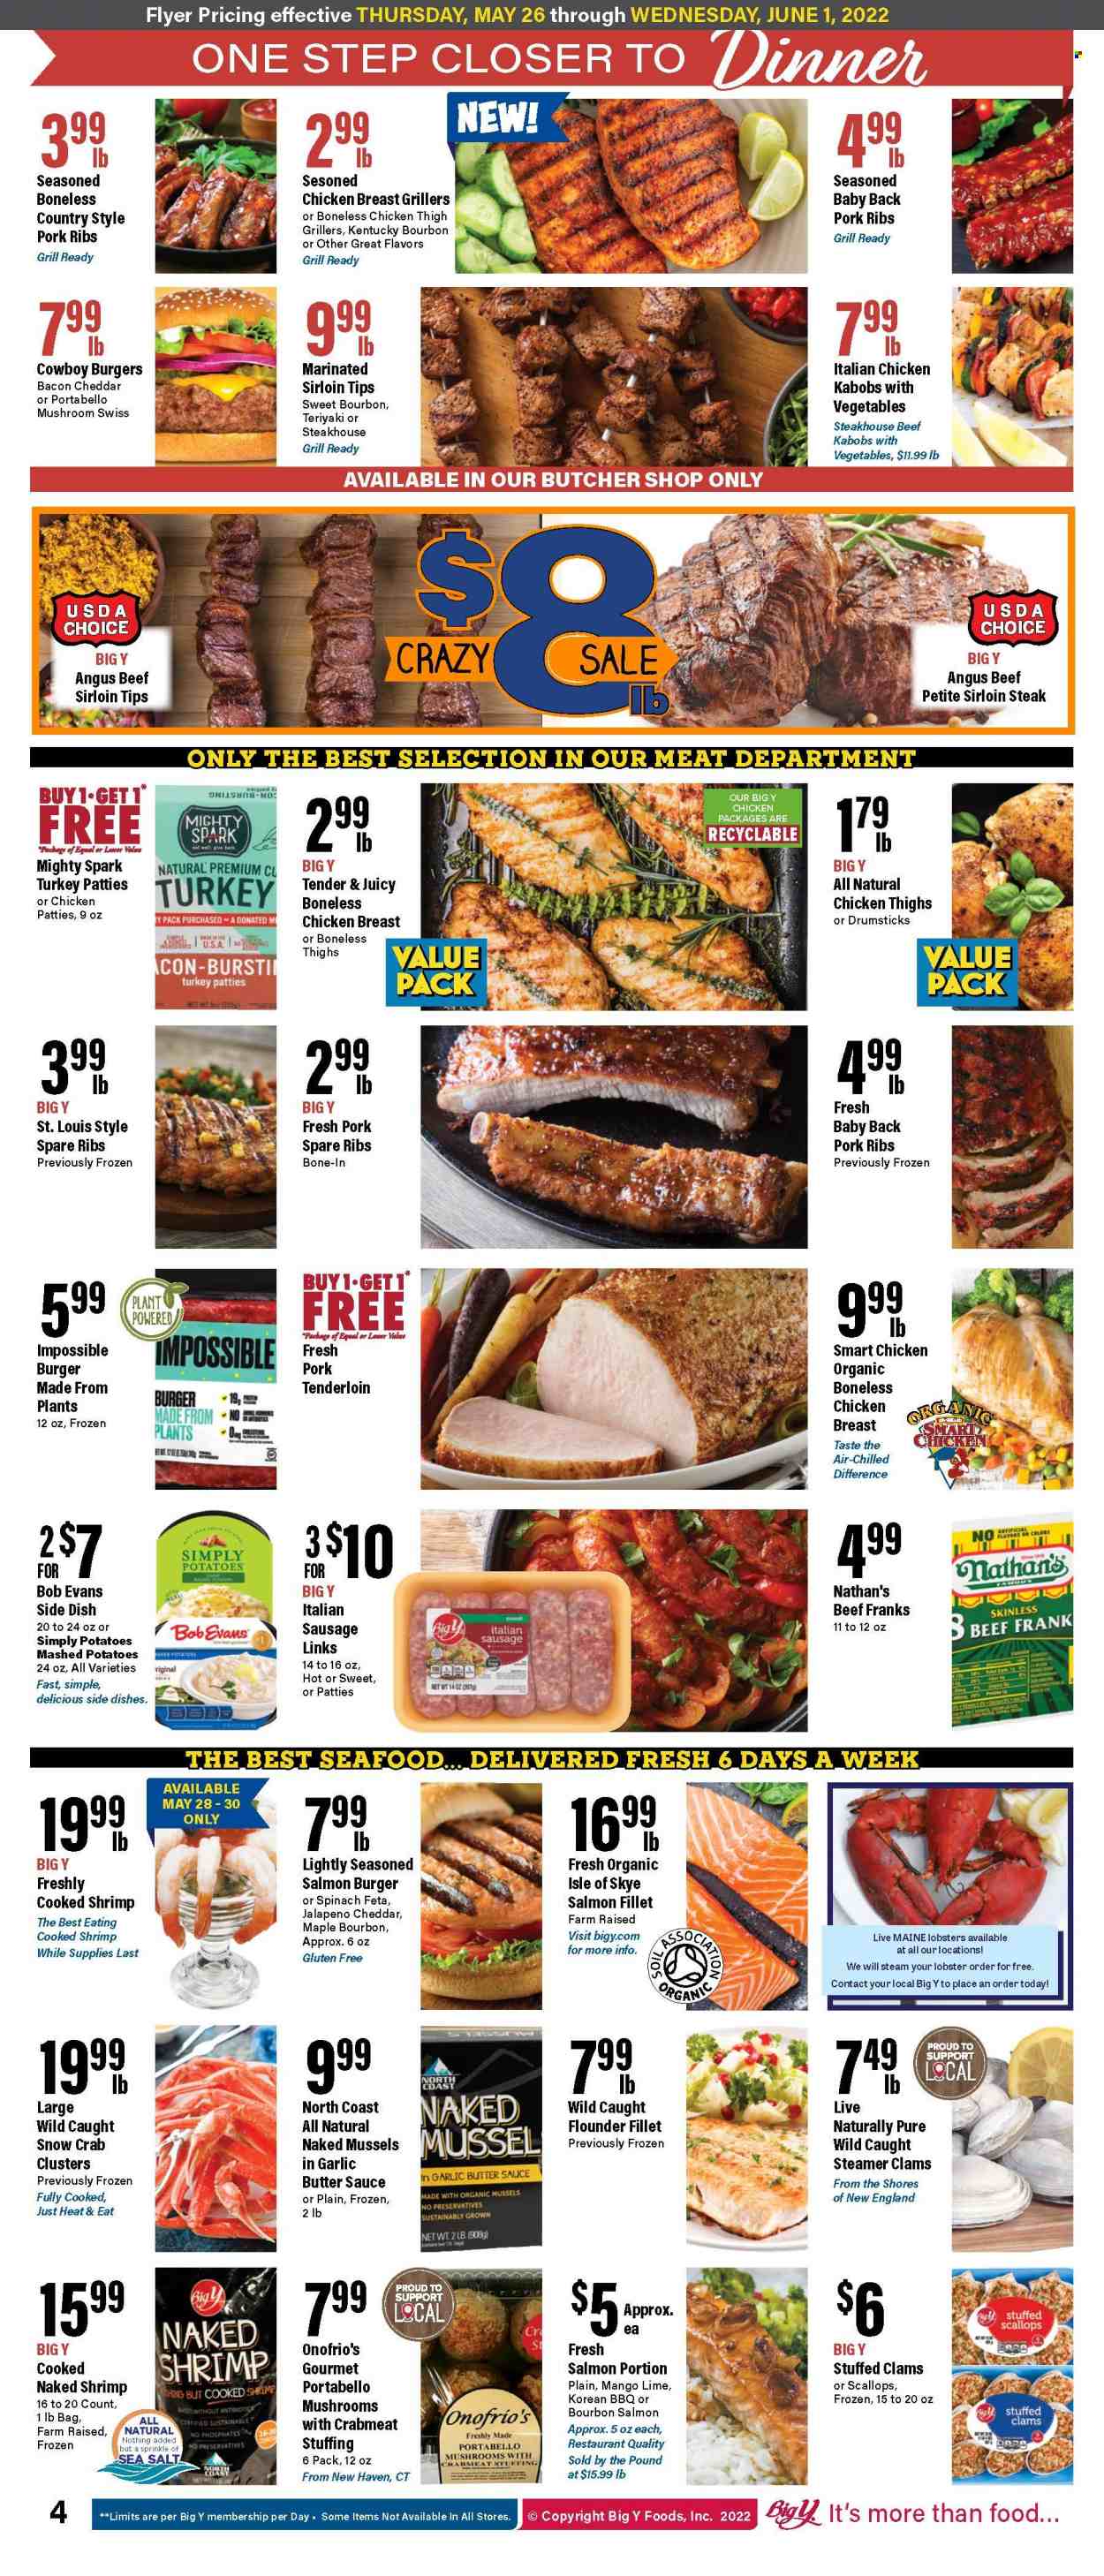 thumbnail - Big Y Flyer - 05/26/2022 - 06/01/2022 - Sales products - mushrooms, jalapeño, clams, crab meat, flounder, lobster, mussels, salmon, salmon fillet, scallops, seafood, crab, shrimps, mashed potatoes, hamburger, sauce, Bob Evans, bacon, sausage, italian sausage, cheddar, cheese, feta, butter, chicken patties, sea salt, chicken breasts, chicken thighs, beef meat, beef sirloin, steak, sirloin steak, pork meat, pork ribs, pork tenderloin, pork spare ribs, pork back ribs. Page 4.